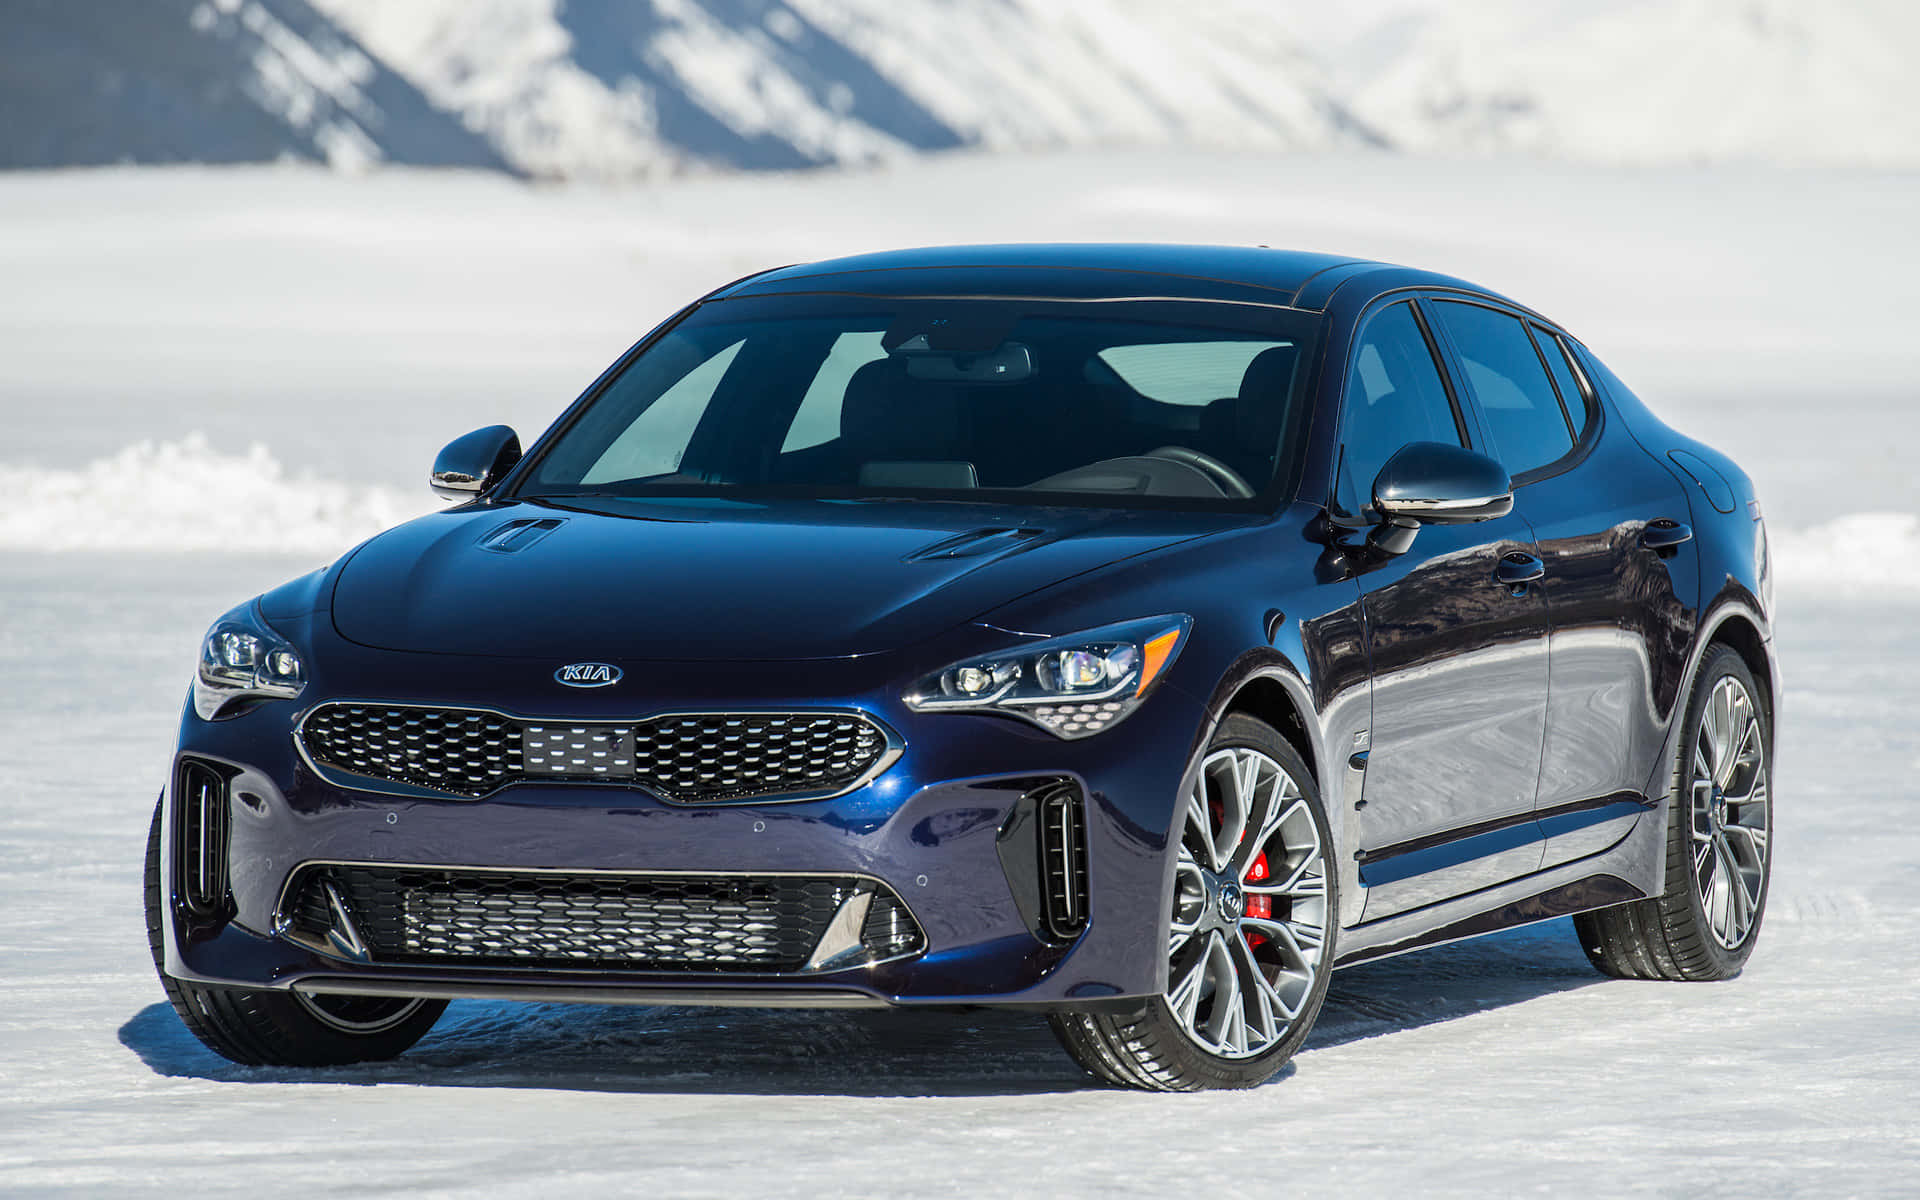 #Kia Stinger in Action: A Combination of Style and Performance# Wallpaper